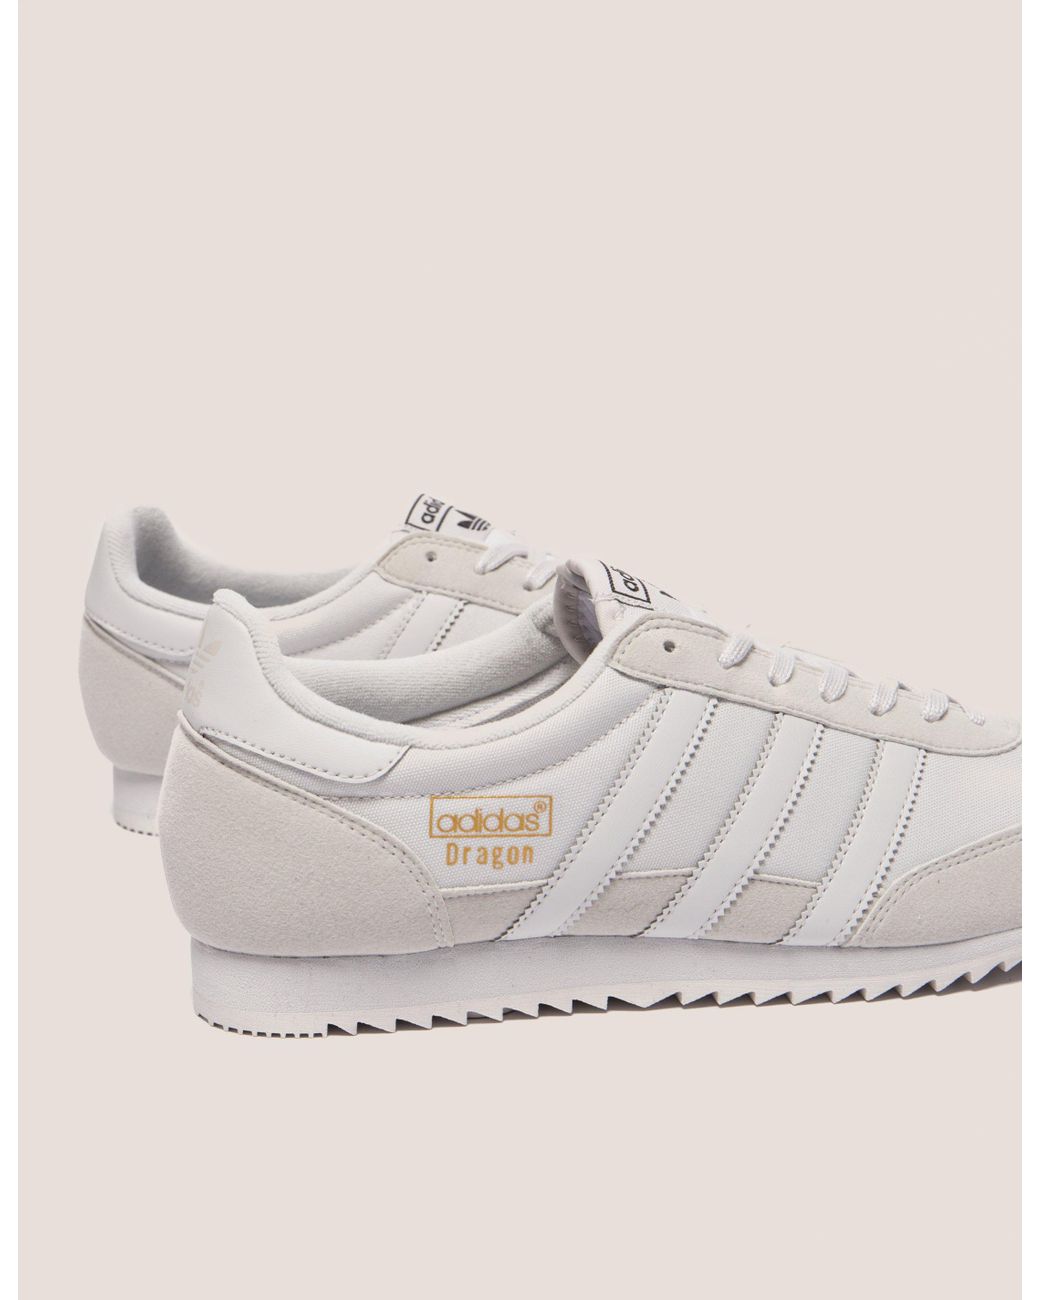 Scotts On Instagram: “The @adidasoriginals #Dragon In #white #leather Is £55 (182089) Get #free Deliver… Adidas Dragon, Originals Dragon, Cute Womens Shoes | triplesmotors.com.au